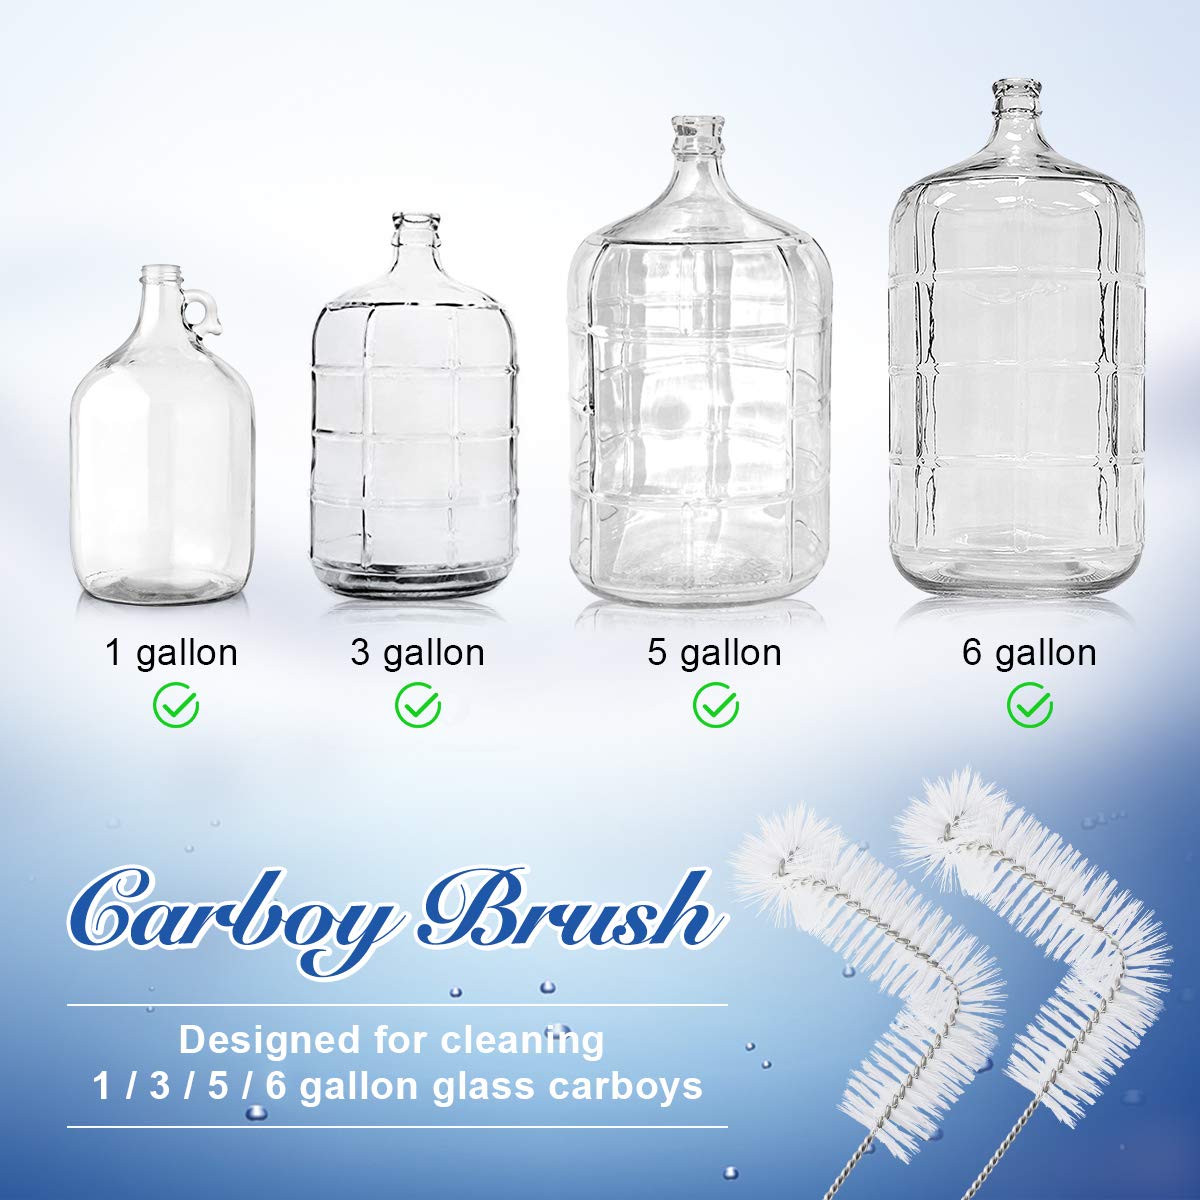 carboy brush designed for cleaning 1/3/5/6 gallon glass carboys